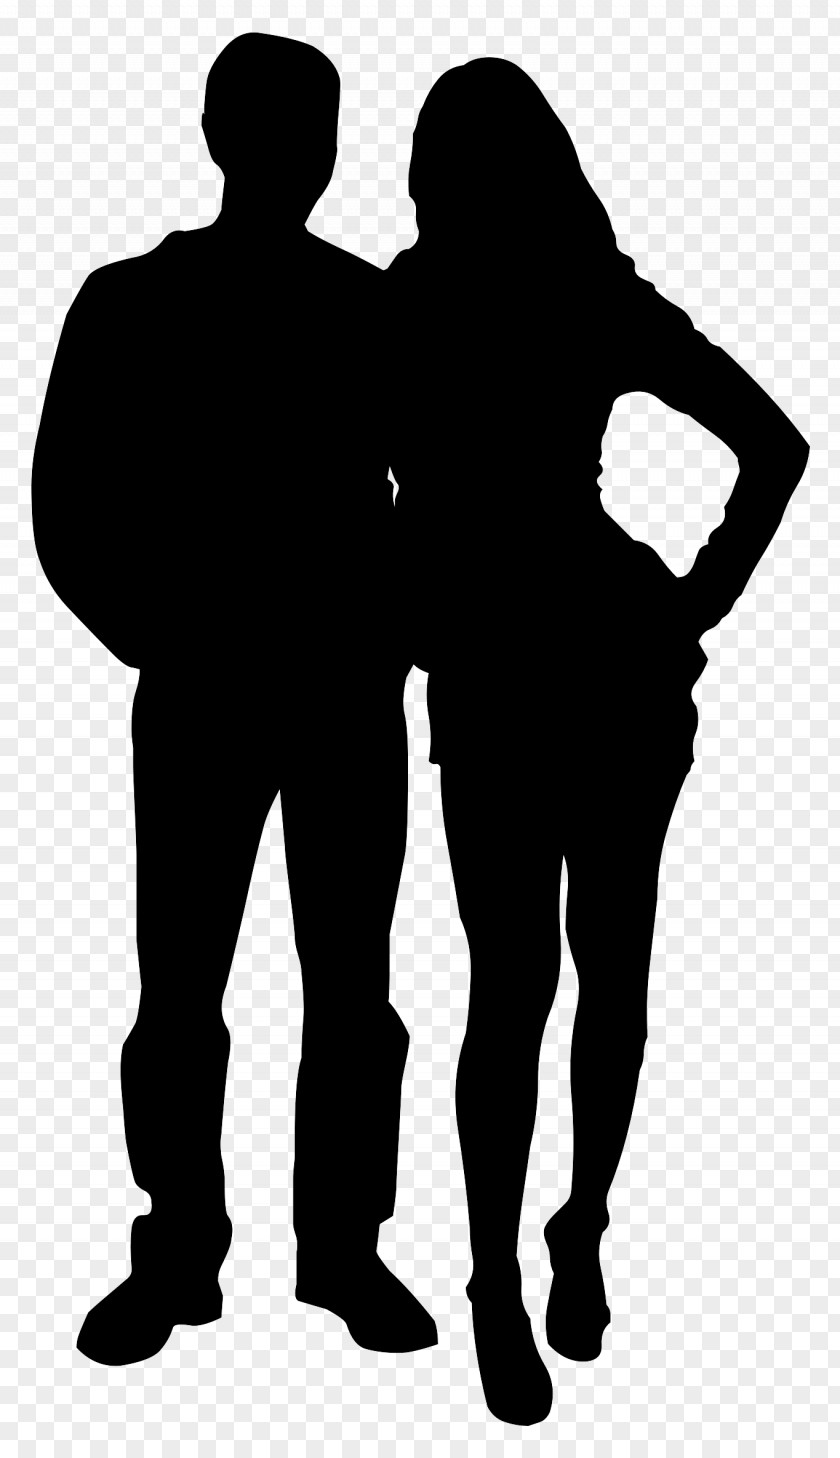 Silhouettes Couple Actor Silhouette Significant Other Love PNG